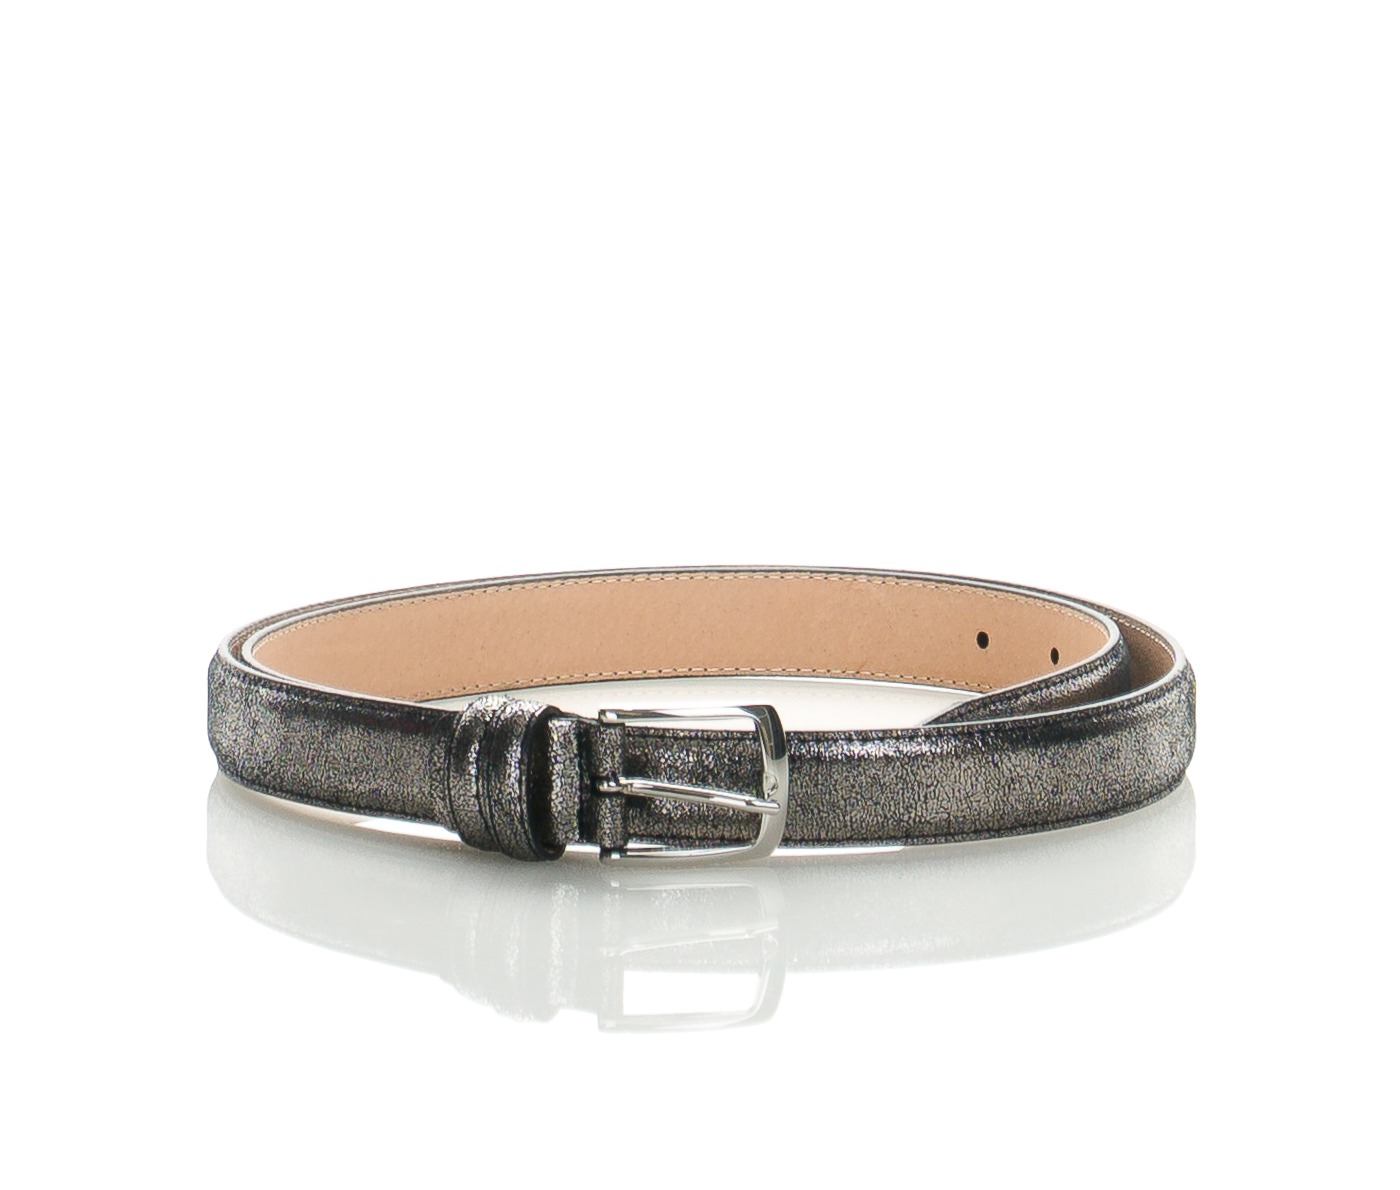 Woman Real Leather Belt